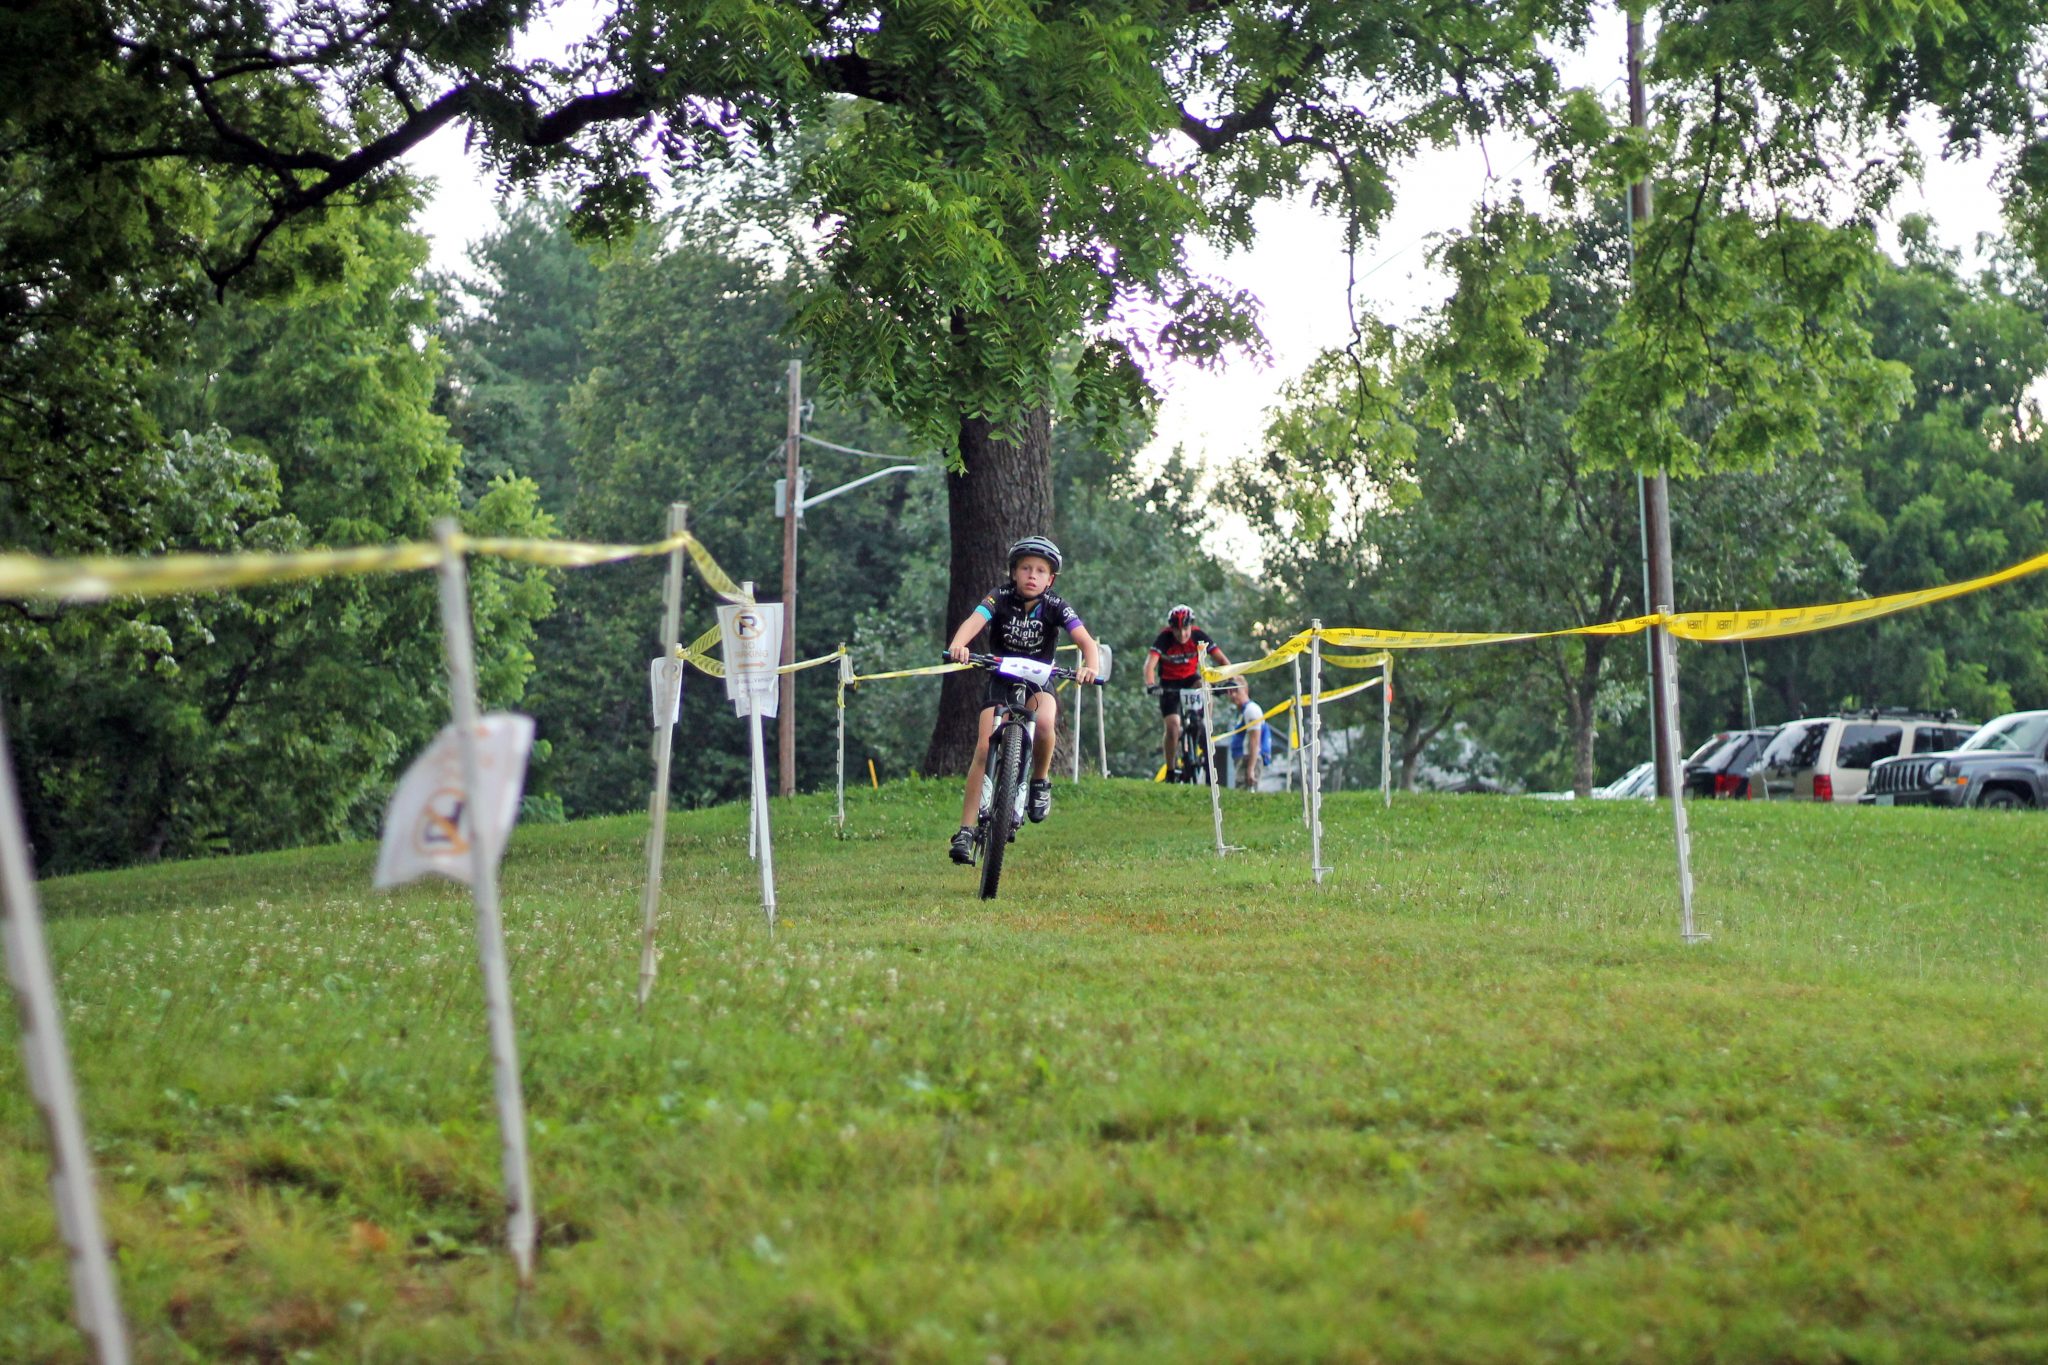 Fishburn youth mountain bikers in Roanoke Parks and Recreation race